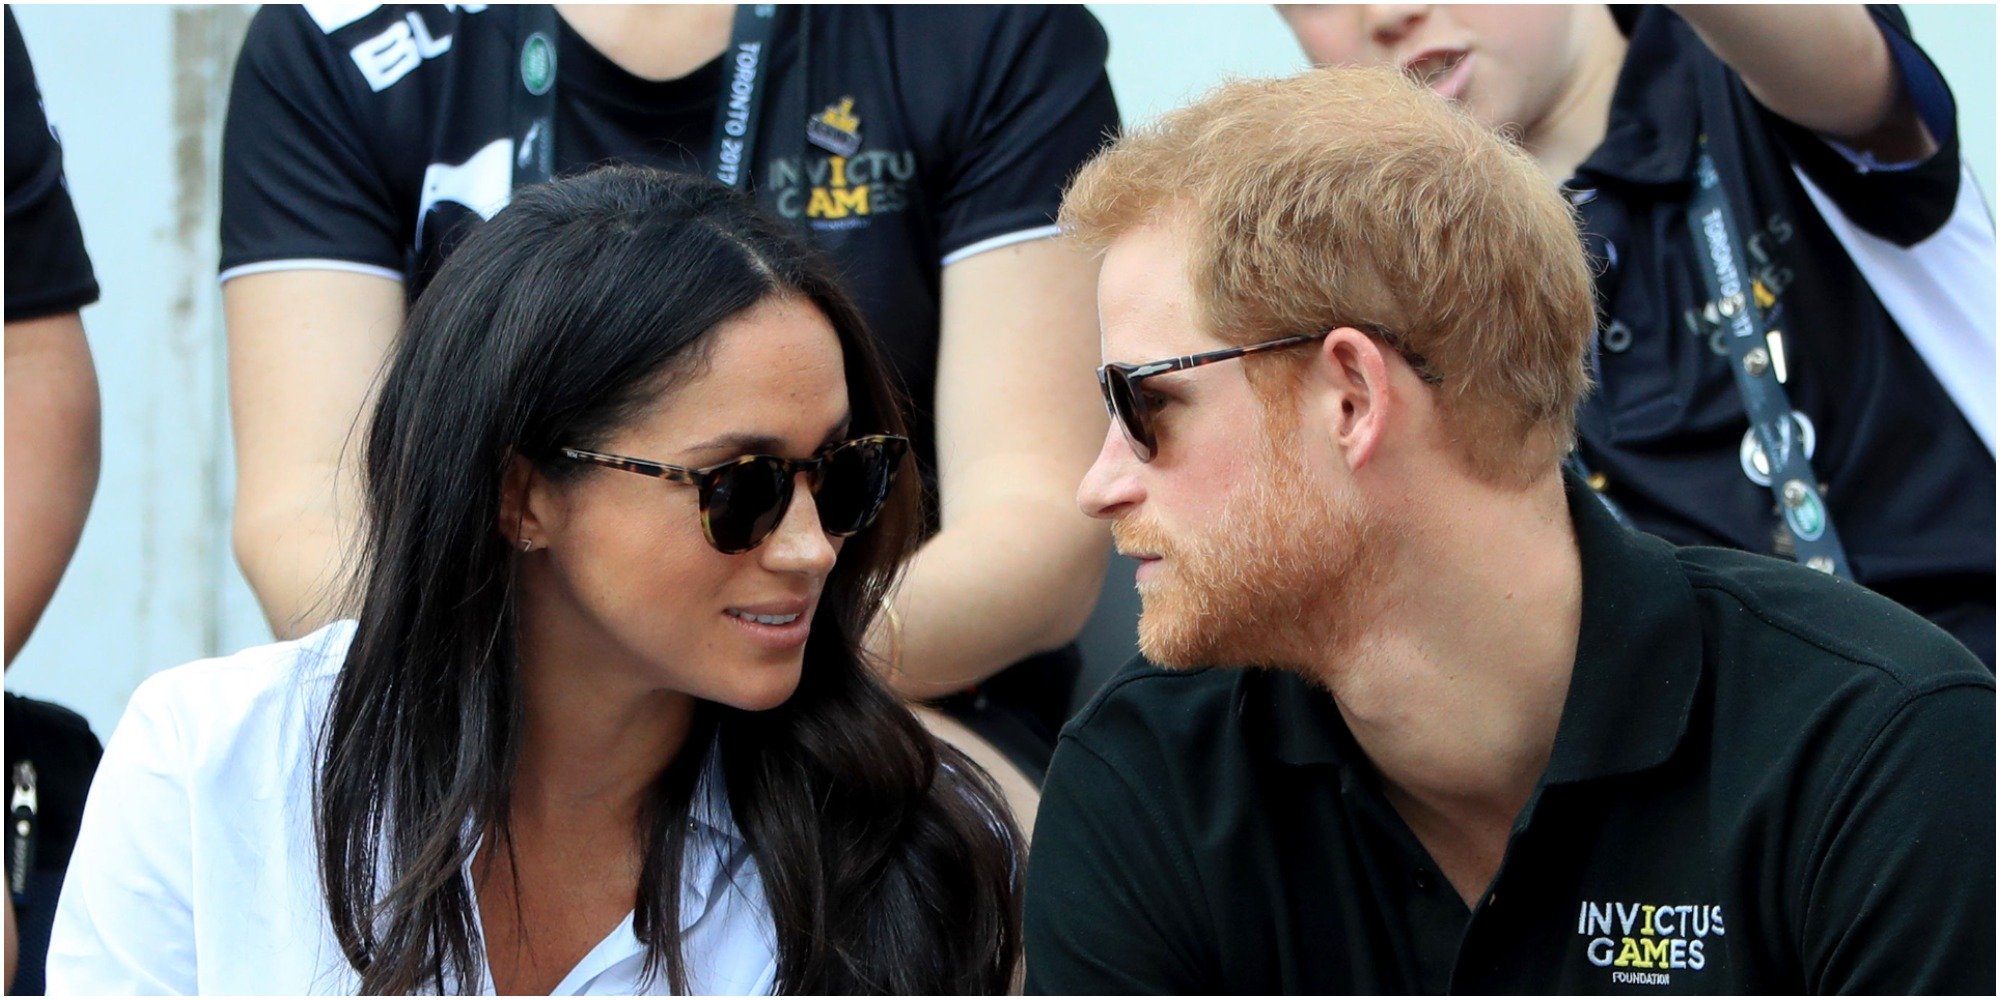 Meghan Markle and Prince Harry wearing sunglasses and talking to each other